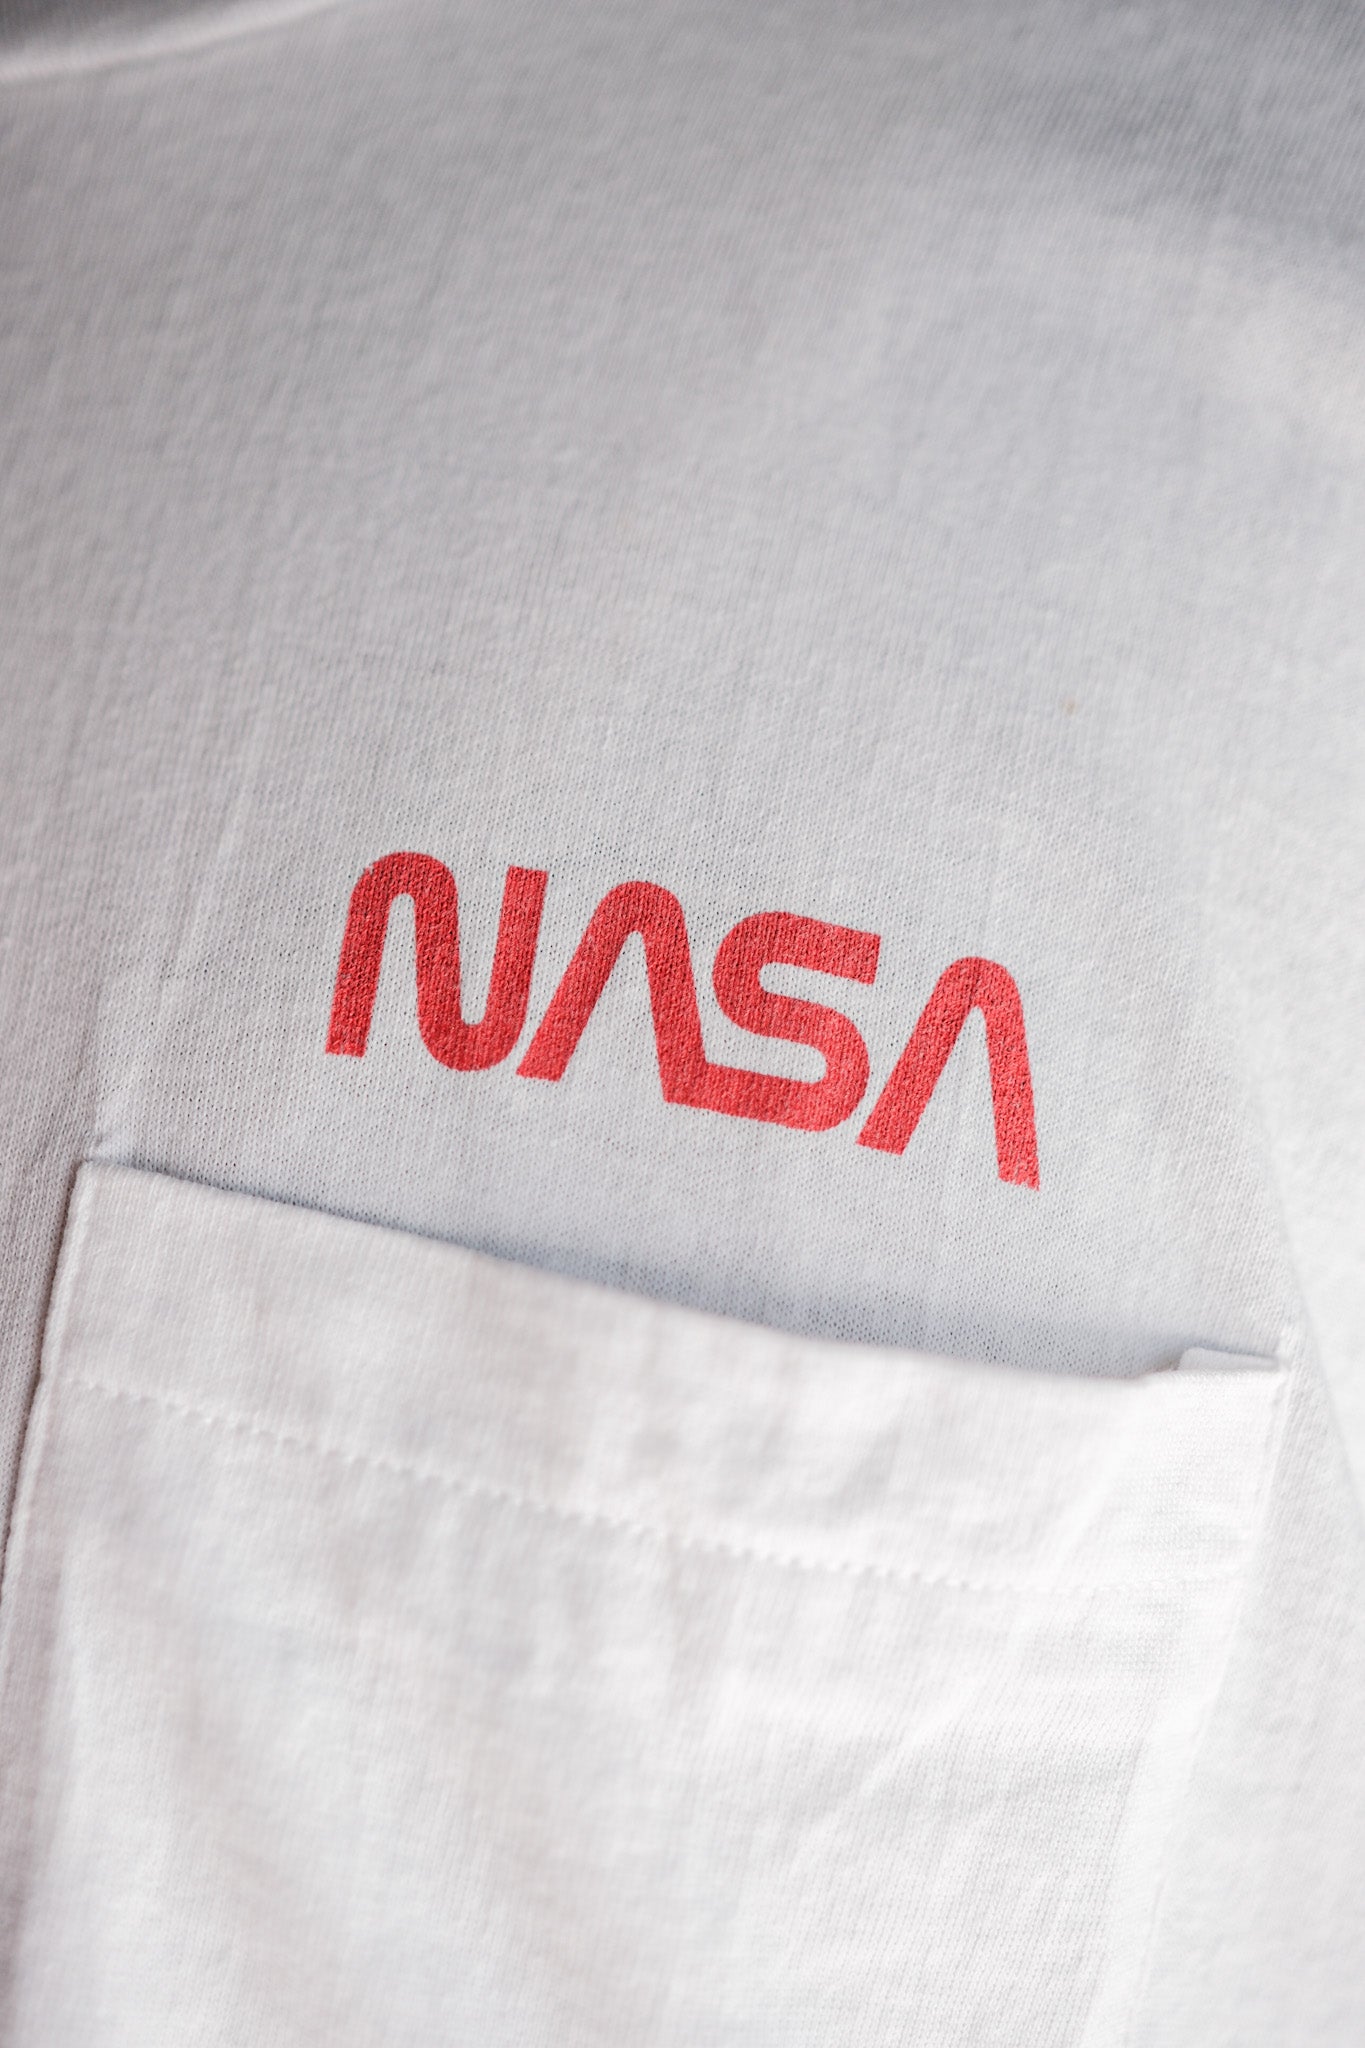 【~90's】Vintage Federal Agency Print T-shirt Size.XL "NASA" "Made in U.S.A."